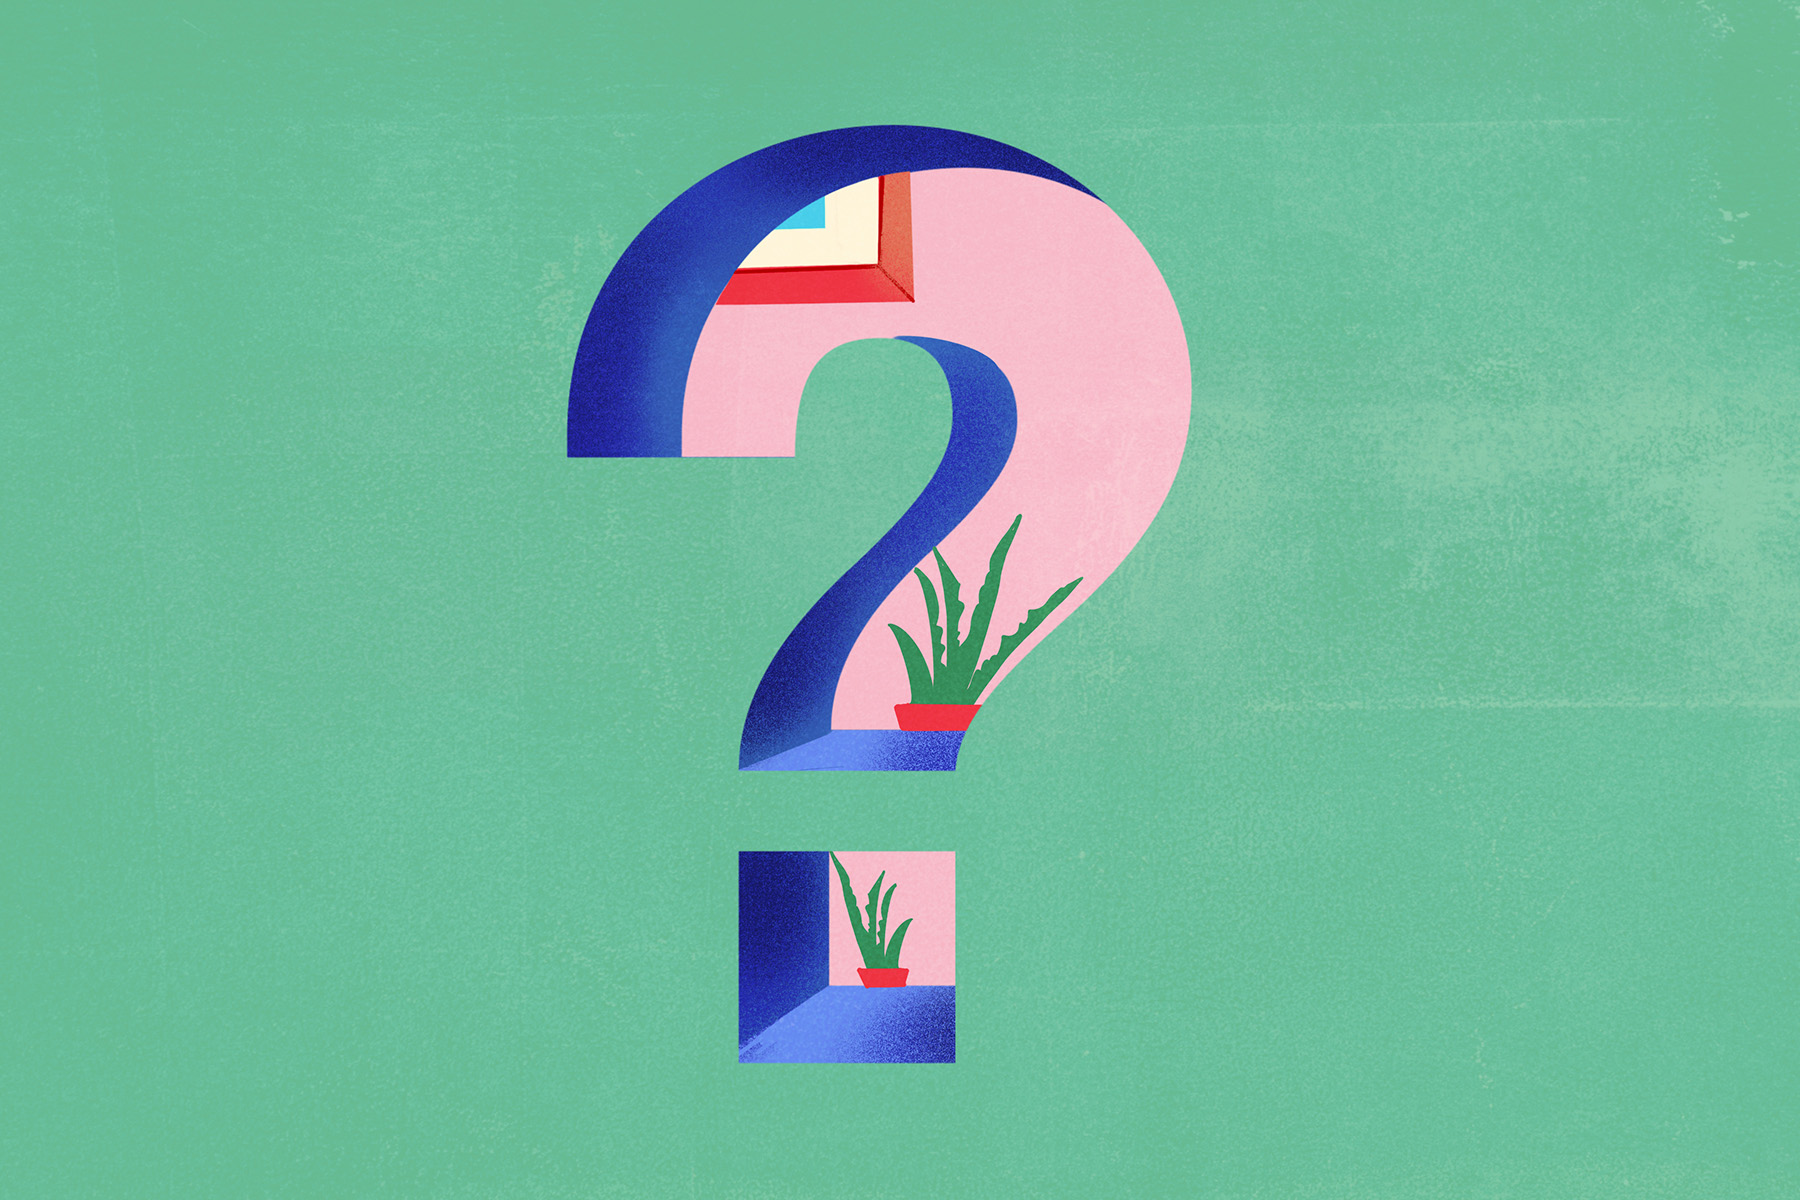 An illustration of a pink question mark on an aqua green background, inside which one can see a living room with houseplants.